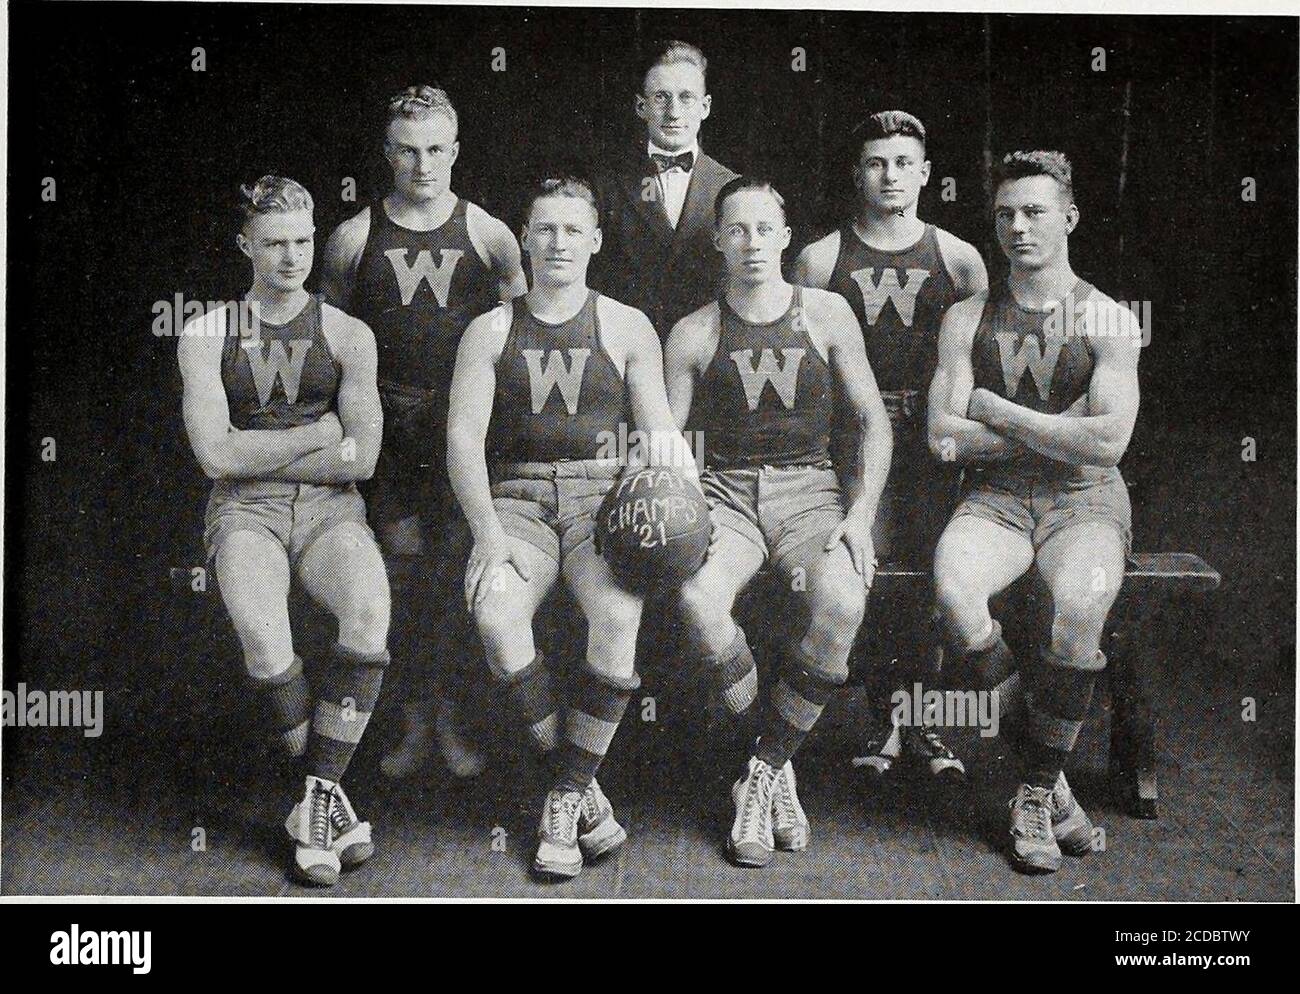 . Syllabus . The Wranglers, 1921 Inter-fraternityBasketball Champions. Grausnick Weis LoONEY GoNSER MauerLang Shearon The Inter-fraternity Track Meet Wranglers. ....... 22 2-^ Sigma Chi. ....... 13 1-2 Scribblers. ....... 10 1-3 Sigma Nu. . ? . . . 7 Beta Theta Pi ..61-5 S. A. E. . . . ..51-5 50 yard Dash—Won by Lane, Scribblers; Marker, Sigma Chi, second; A/IcElwain, Sigma Nu, third; Magnuson, Phi Delta Theta, fourth.440 yard Dash—Won by Palmer, Sigma Nu; Mauer, Wranglers, second; Ripley, Beta Theta Pi, third; Vinnedge, Sigma Chi, fourth.880 yard Run—Won by Davis, Wranglers; Gibson, Sigma Chi Stock Photo